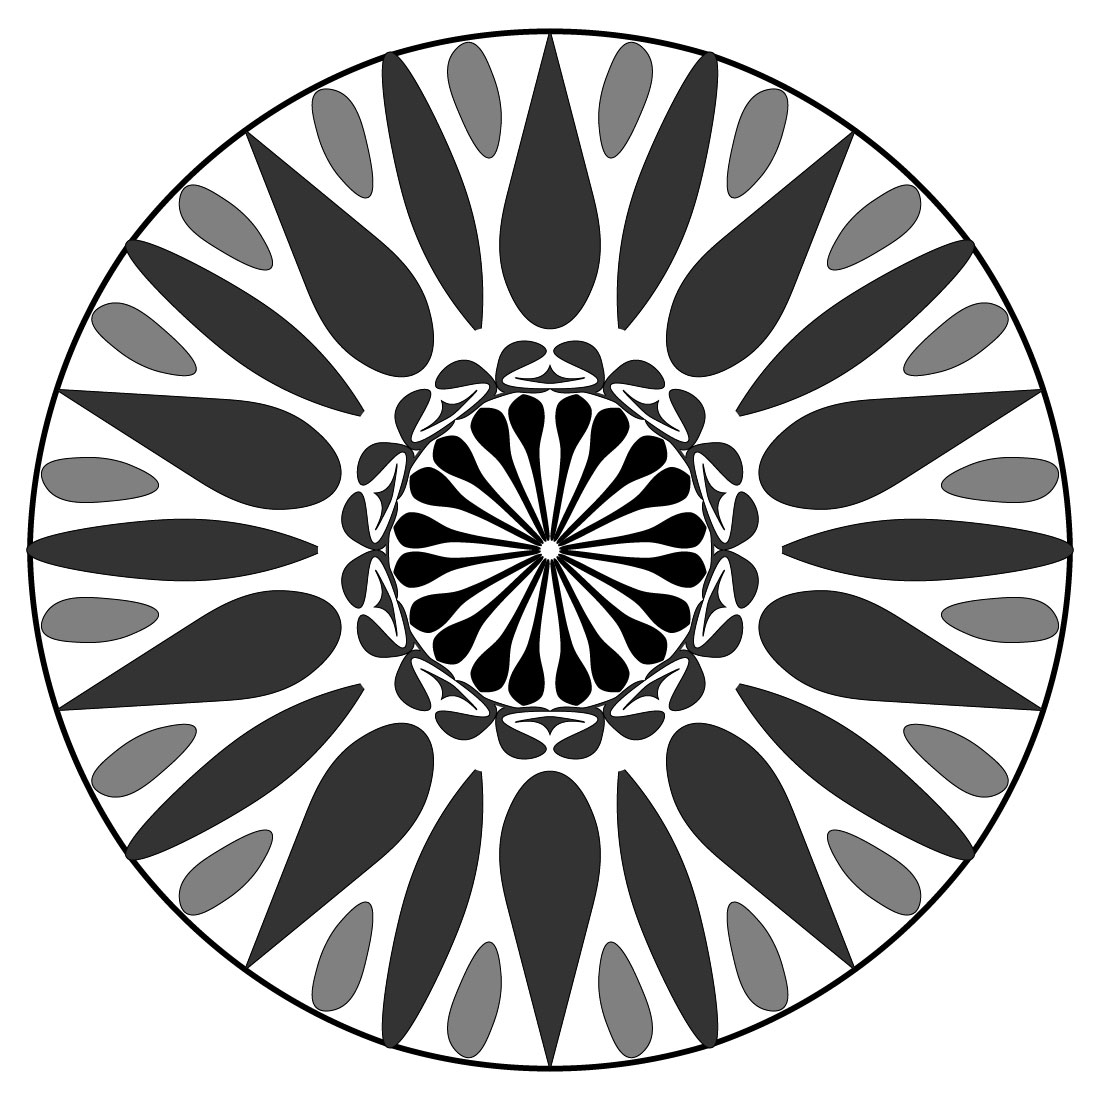 Mandala-Art-with-long-petales-in-black-and-white preview image.